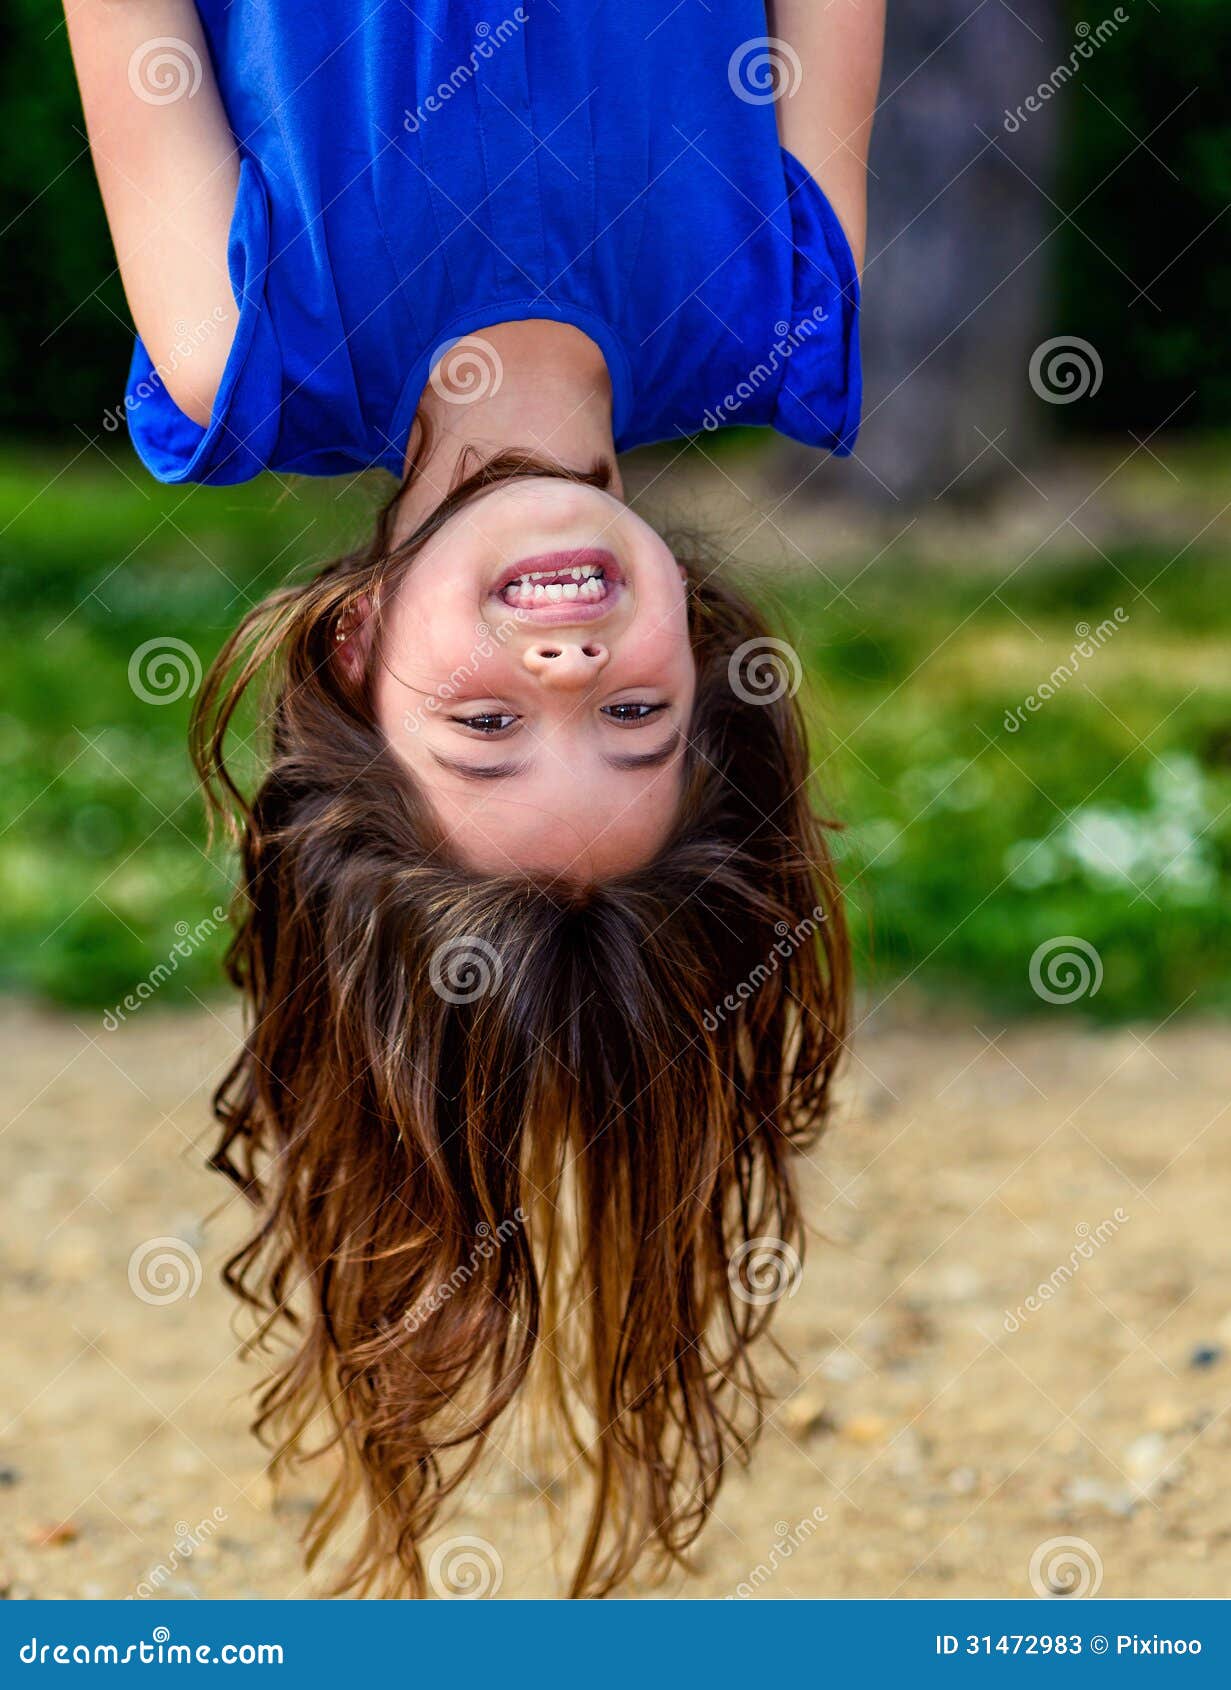 Beautiful Child Hanging Upside and Laughing Stock Image - Image of ...